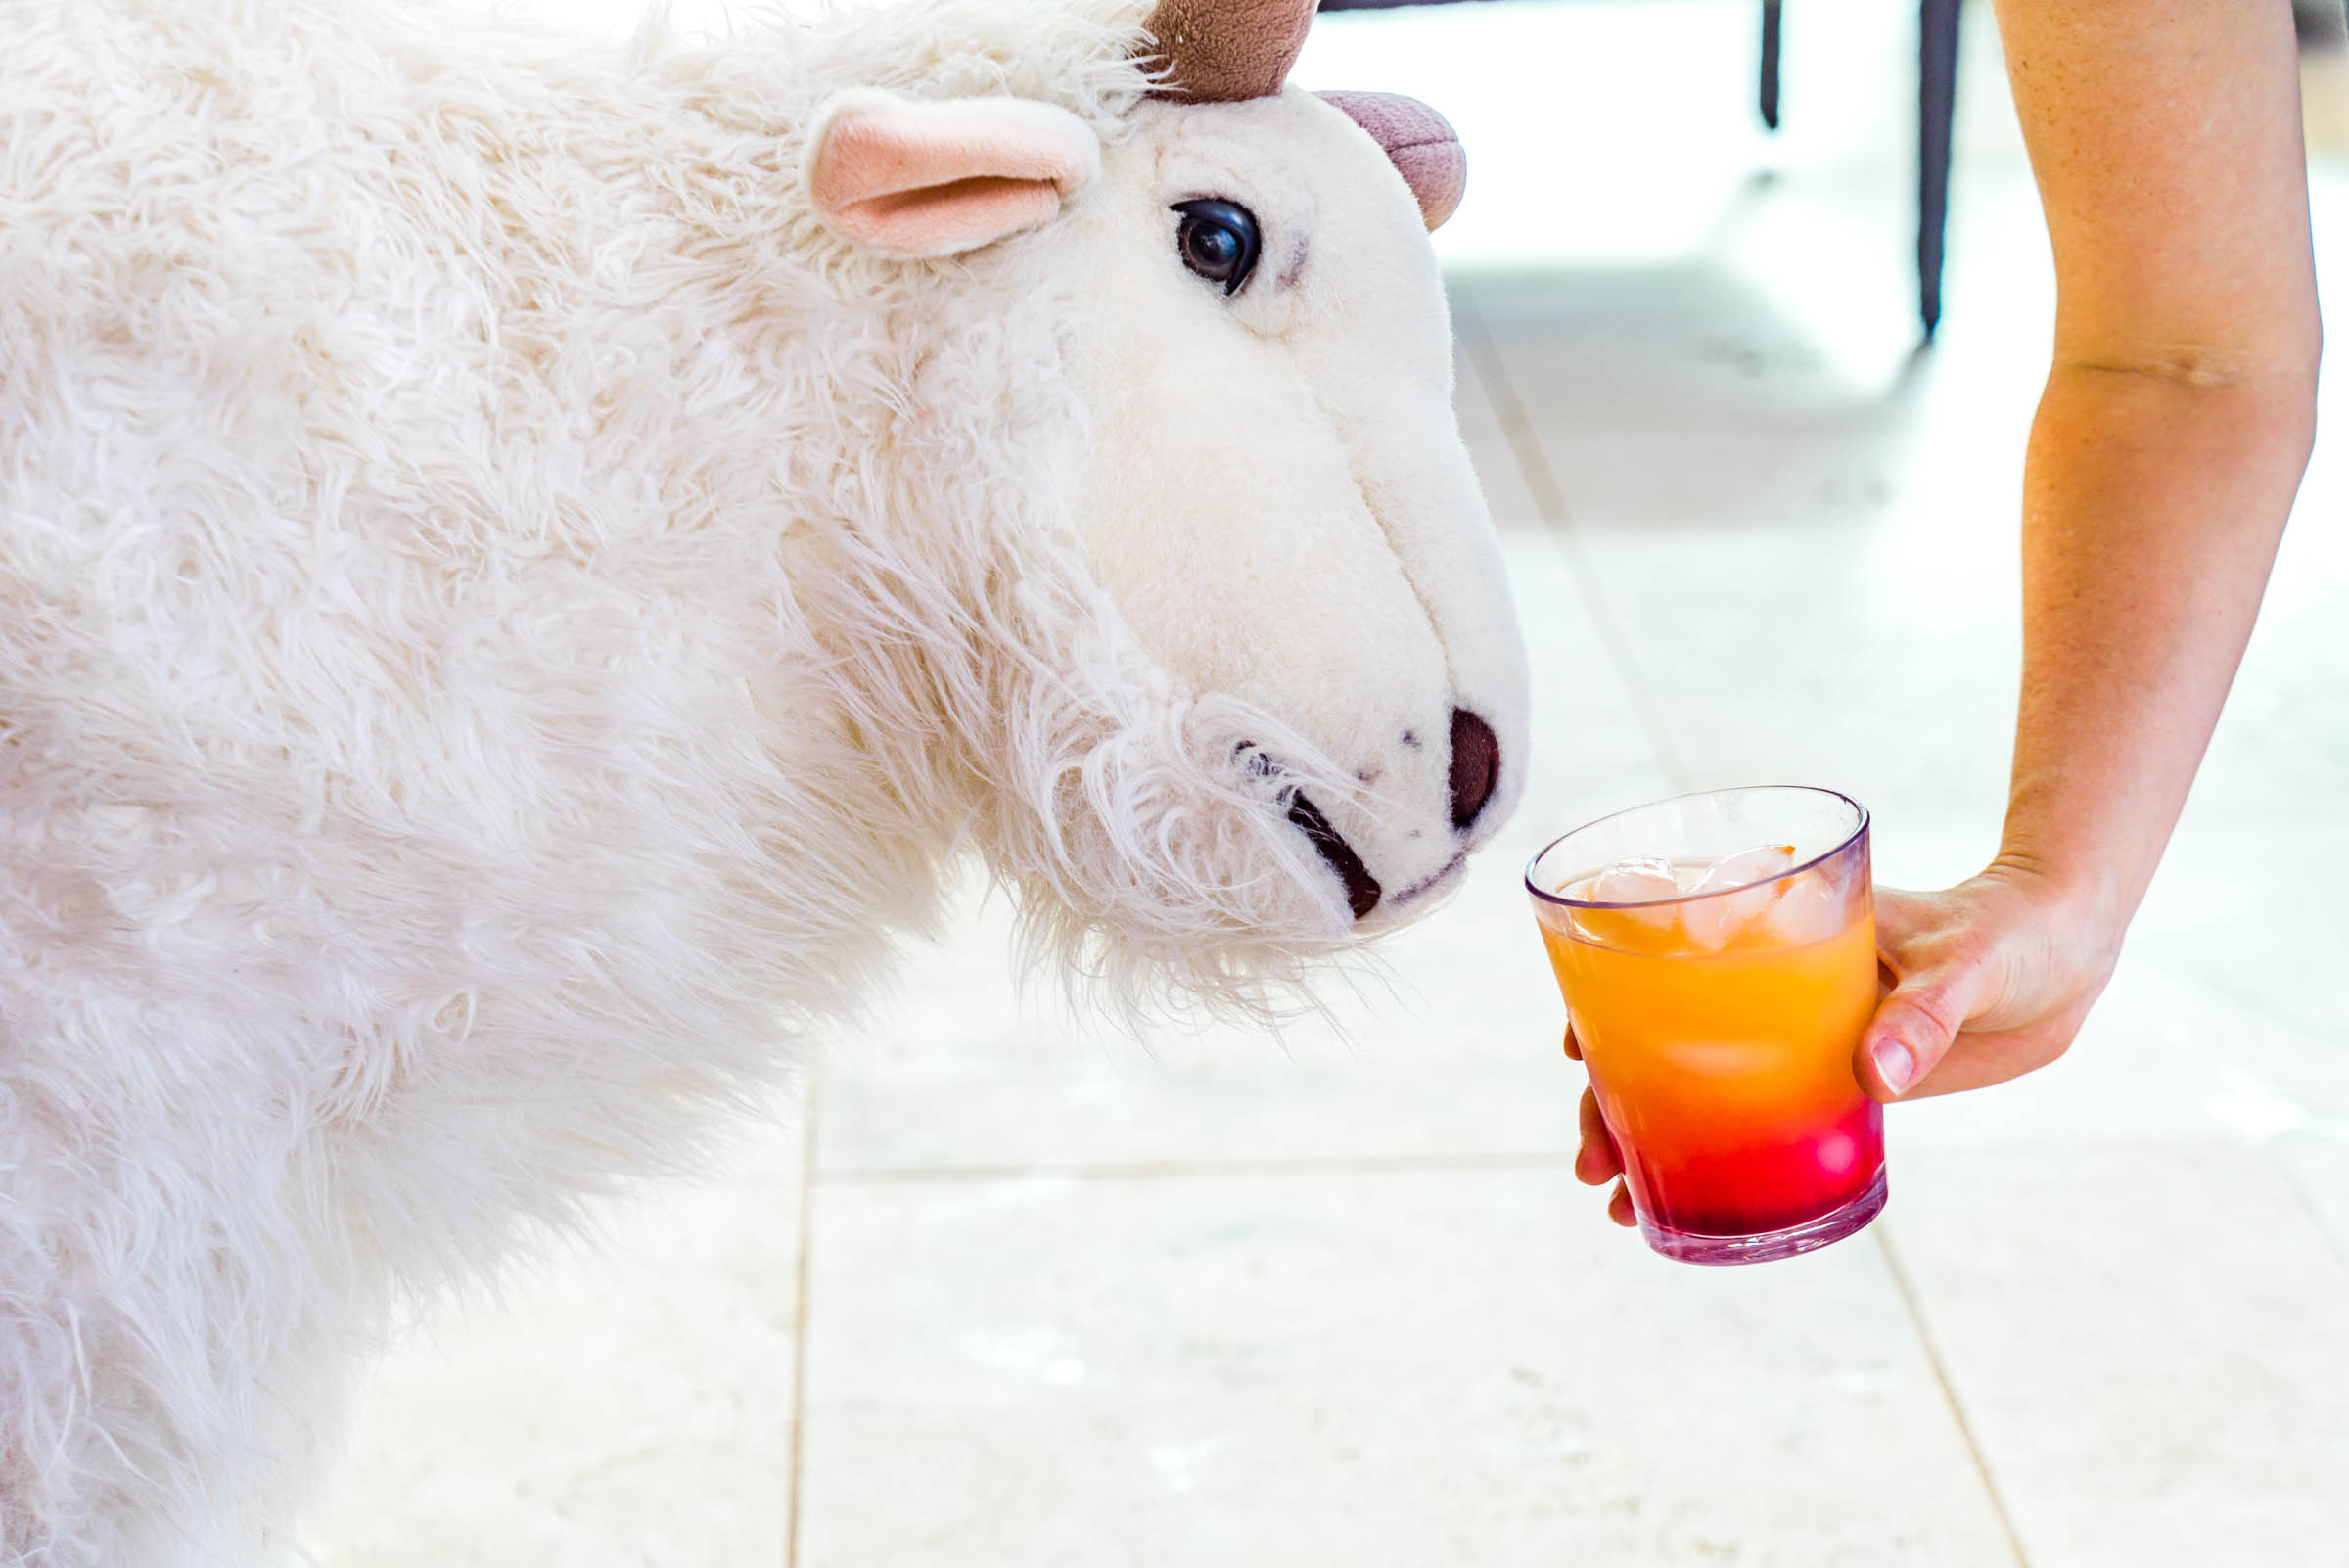 Oh... And there's a goat plus unlimited tequila.